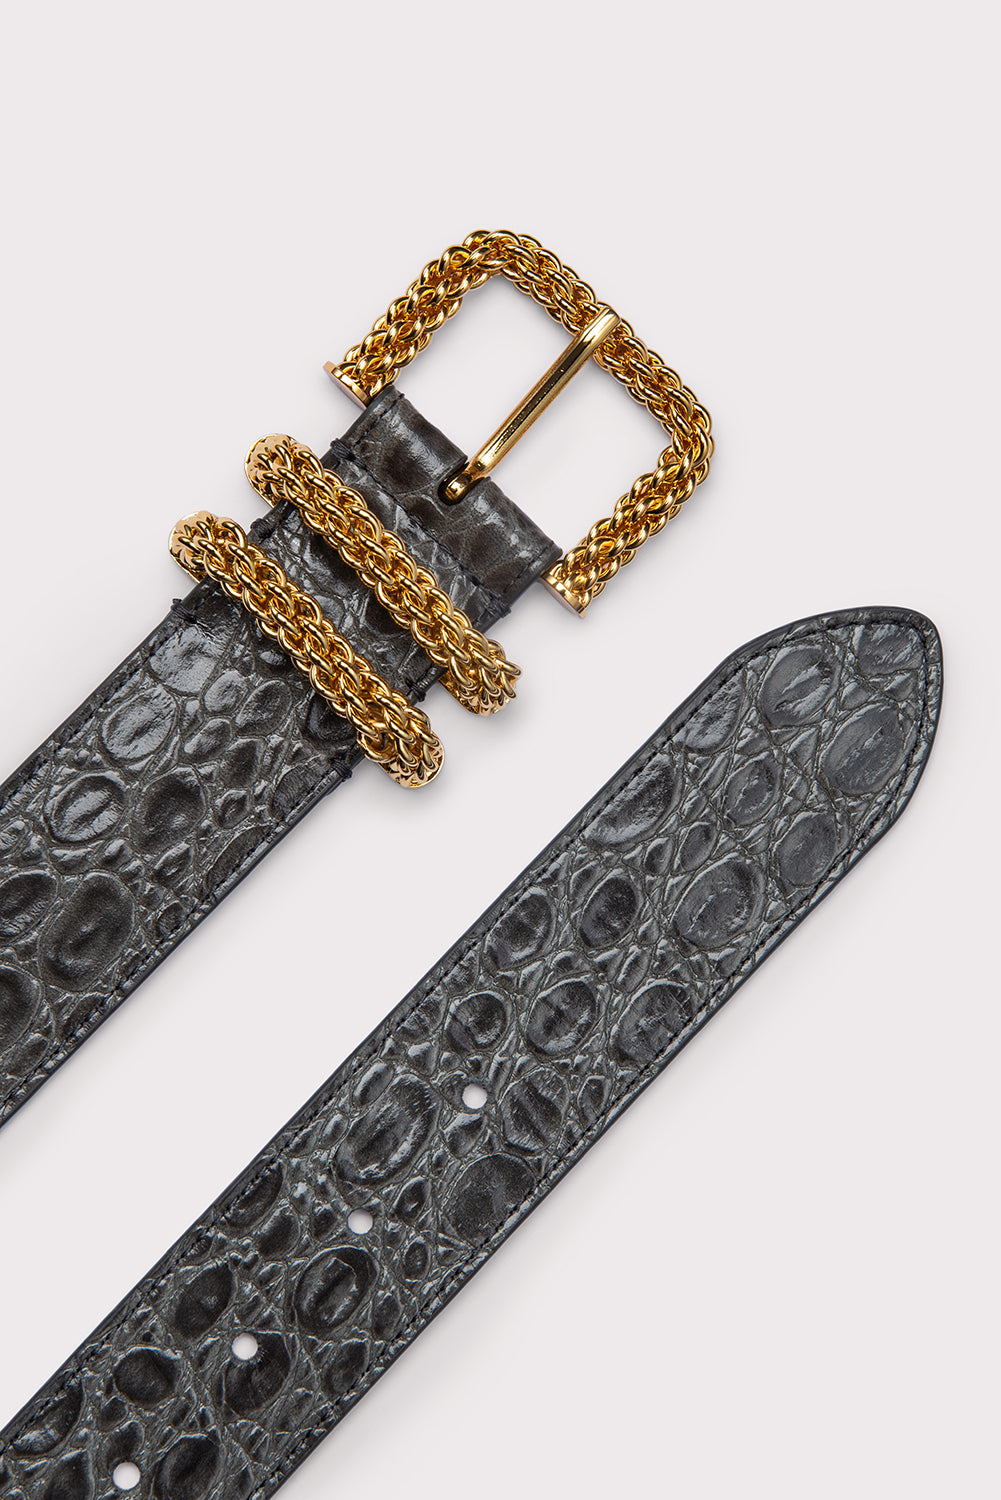 BY FAR Katina Croc-Embossed Chain Belt